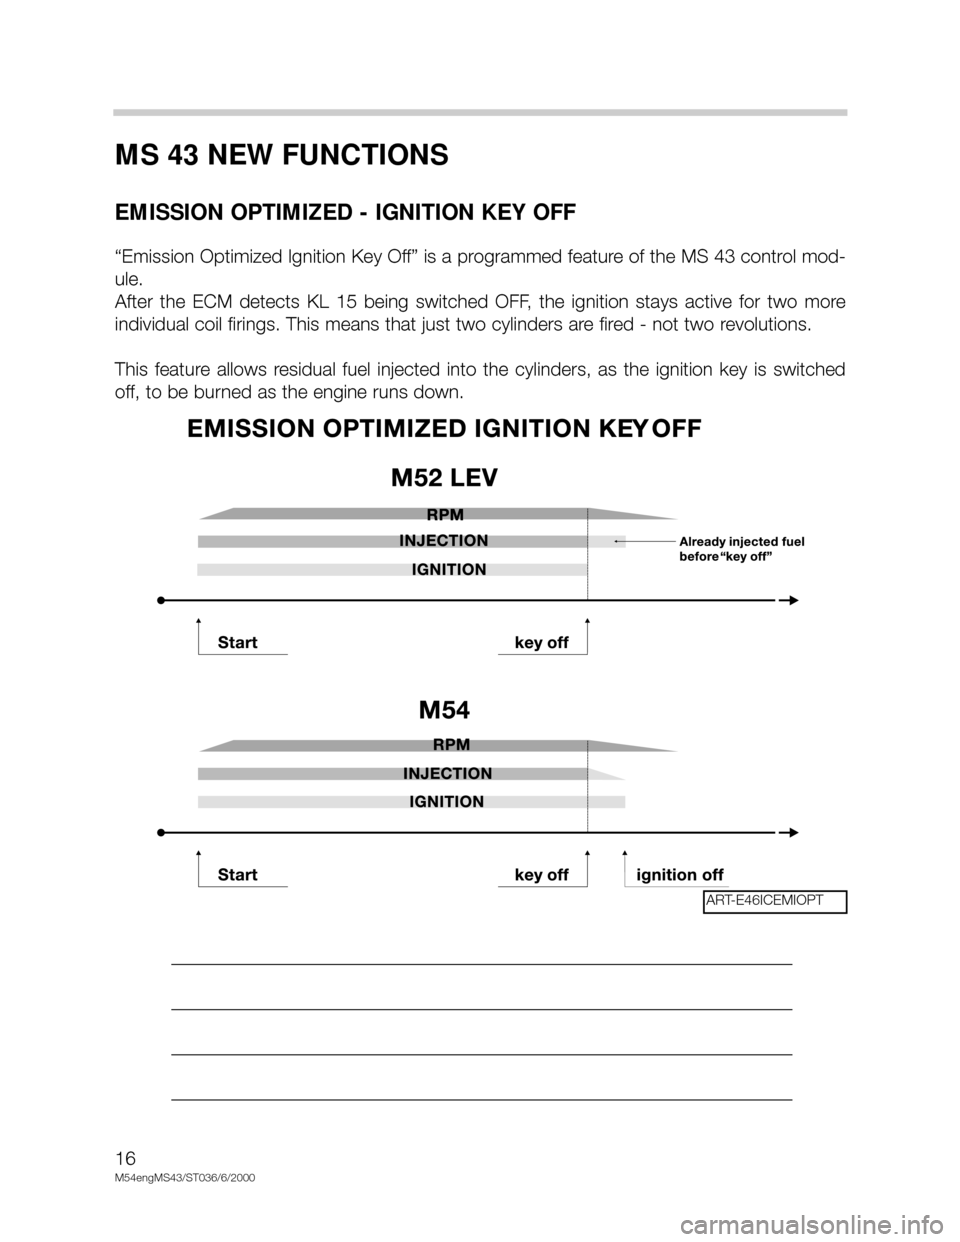 BMW X5 2004 E53 M54 Engine Workshop Manual 16
M54engMS43/ST036/6/2000
MS 43 NEW FUNCTIONS
EMISSION OPTIMIZED - IGNITION KEY OFF
“Emission Optimized Ignition Key Off” is a programmed feature of the MS 43 control mod-
ule. 
After  the  ECM  